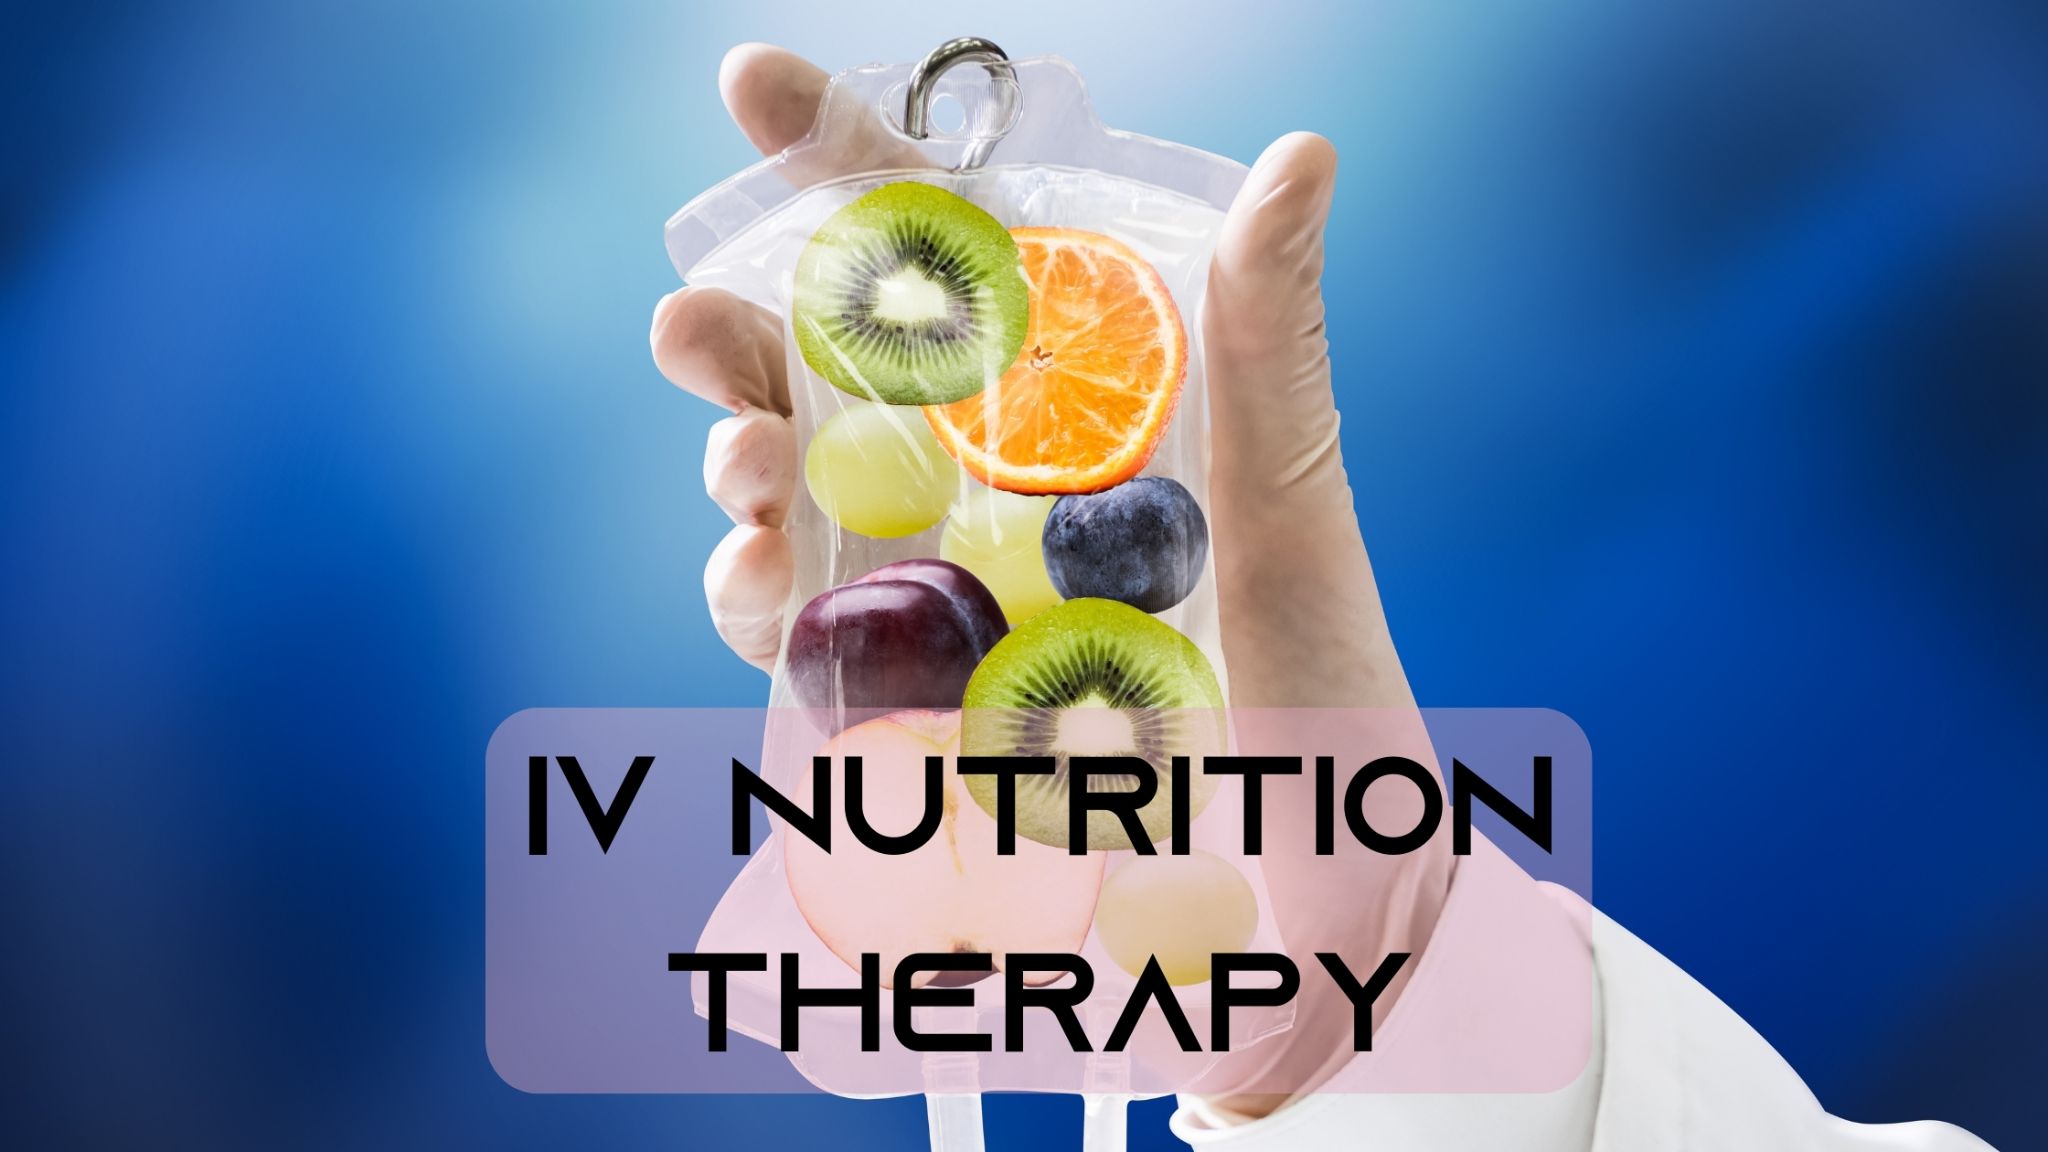 iv nutrition therapy